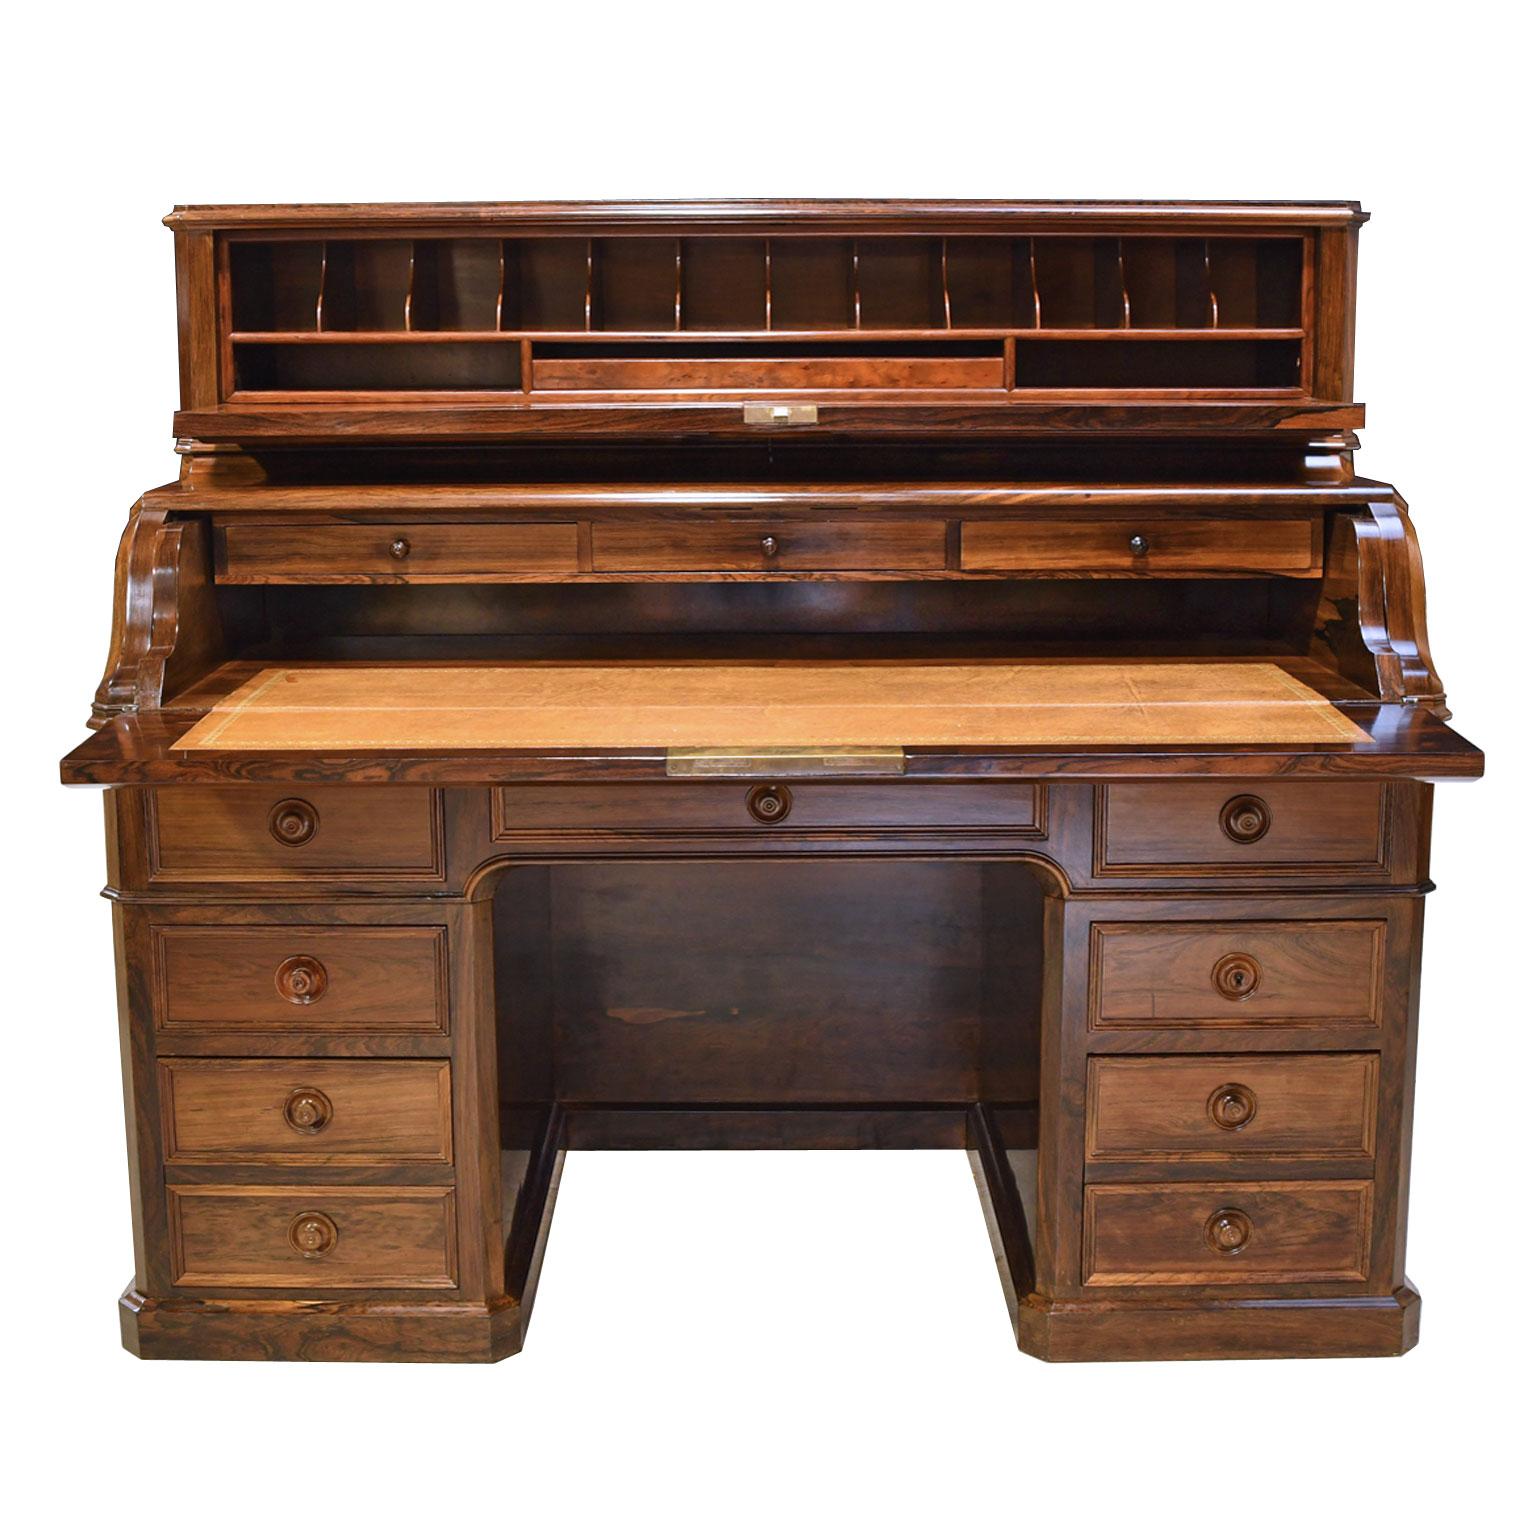 This exceptional desk with secretaire dating from 1865, during the time of Napoleon III, Emperor of the French (1852-1870), displays an extraordinary level of craftsmanship & is a distinctive work of French cabinetry that displays a high level of